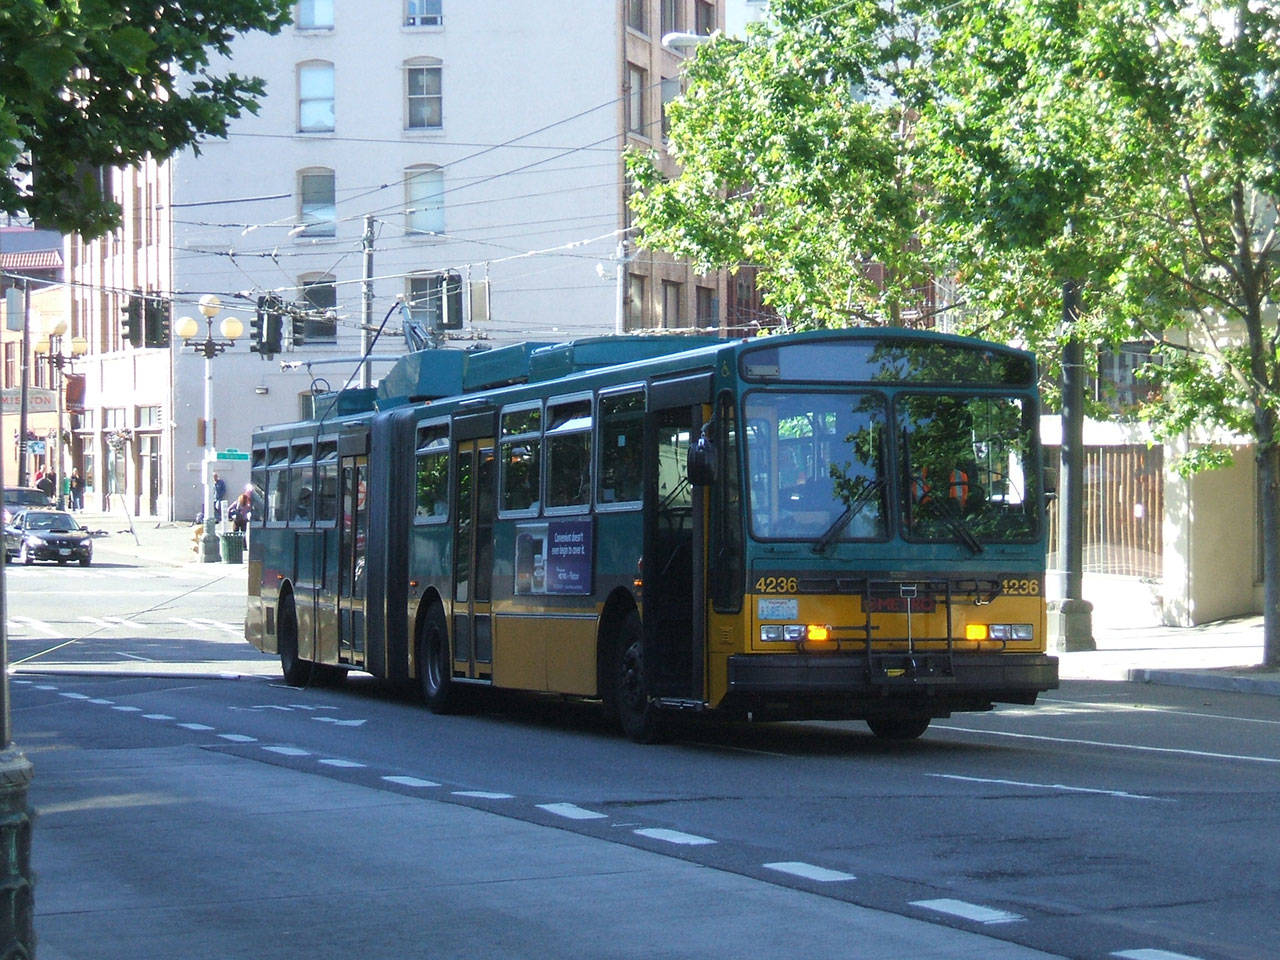 Ride transit to Seattle area for weekend events